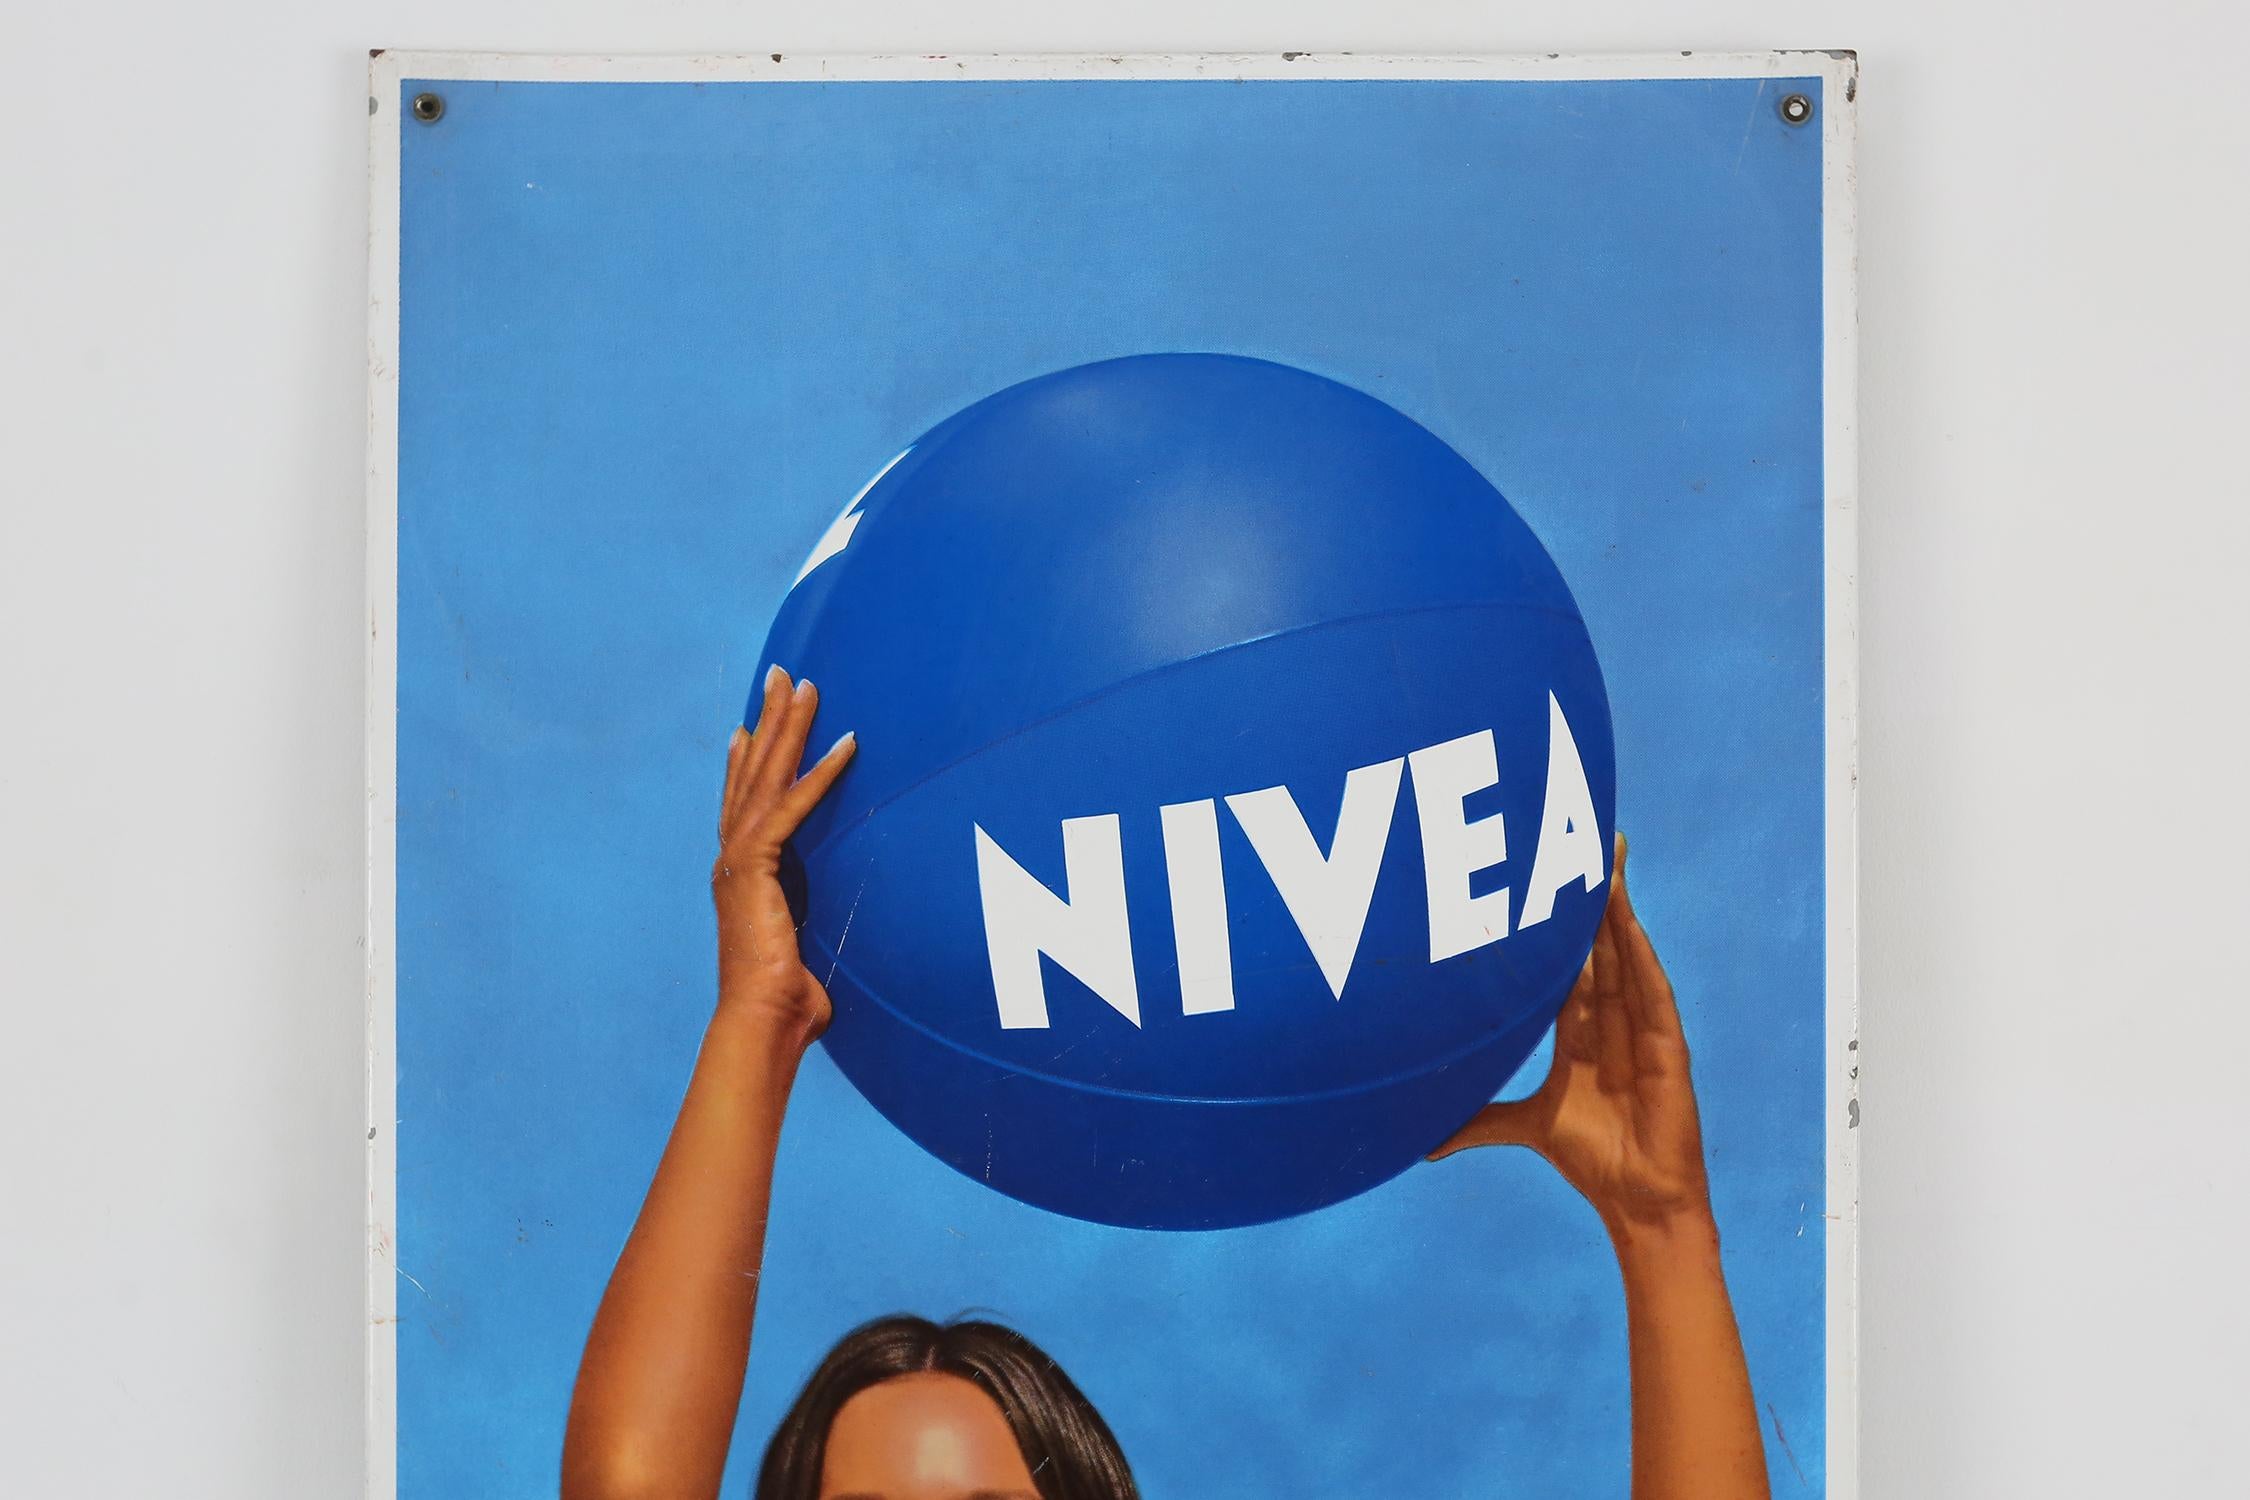 Vintage sign in metal, advertising 'Nivea', a great item for on the pool or in the pool house.